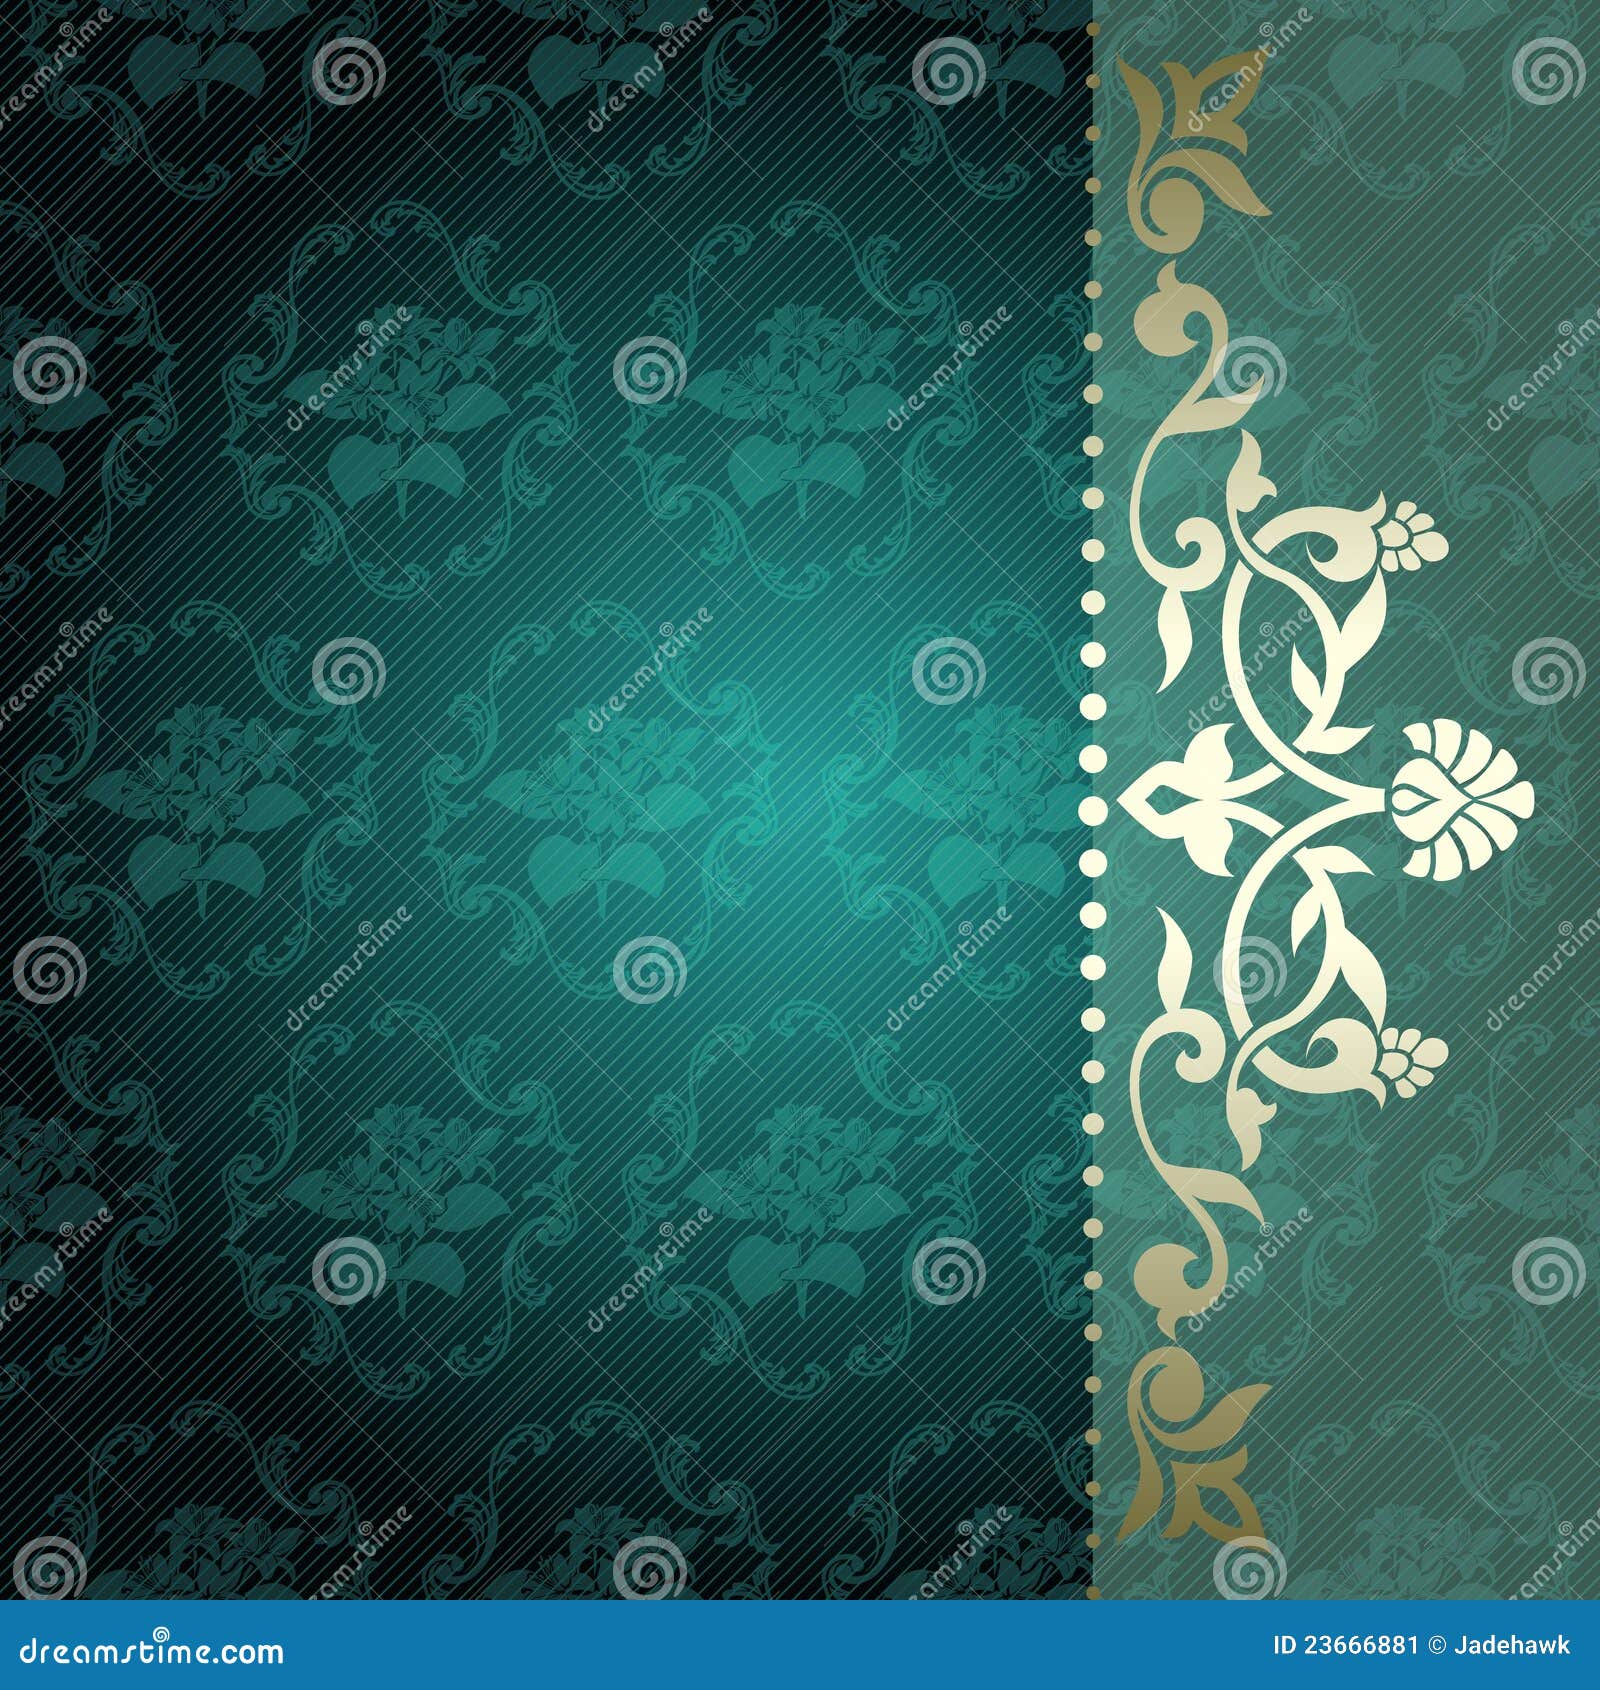 Floral Arabesque Background In Green And Gold Stock Vector ...